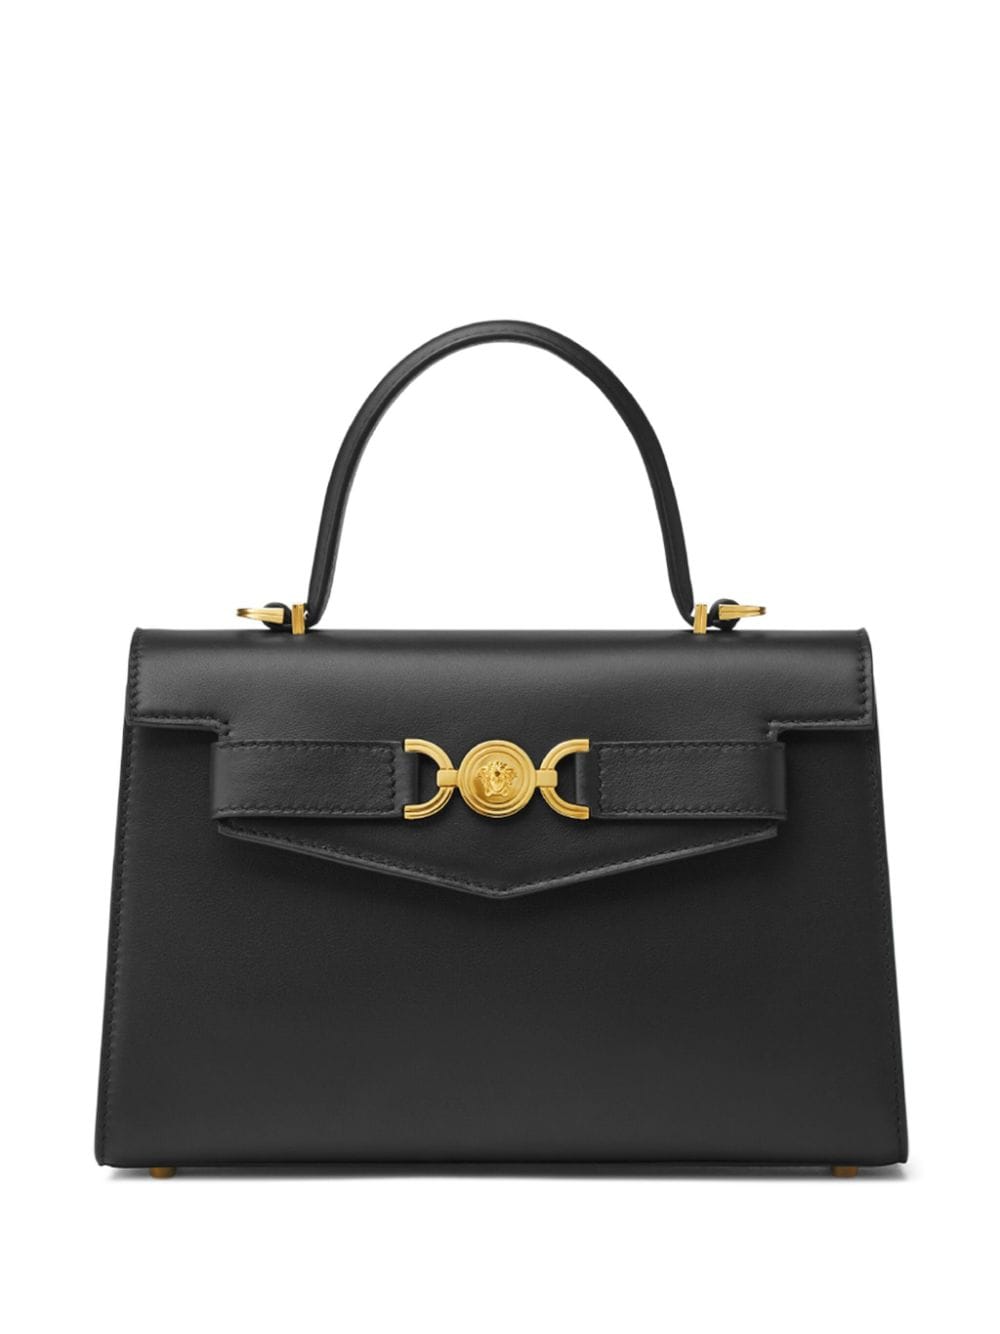 Versace Leather Tote Bag